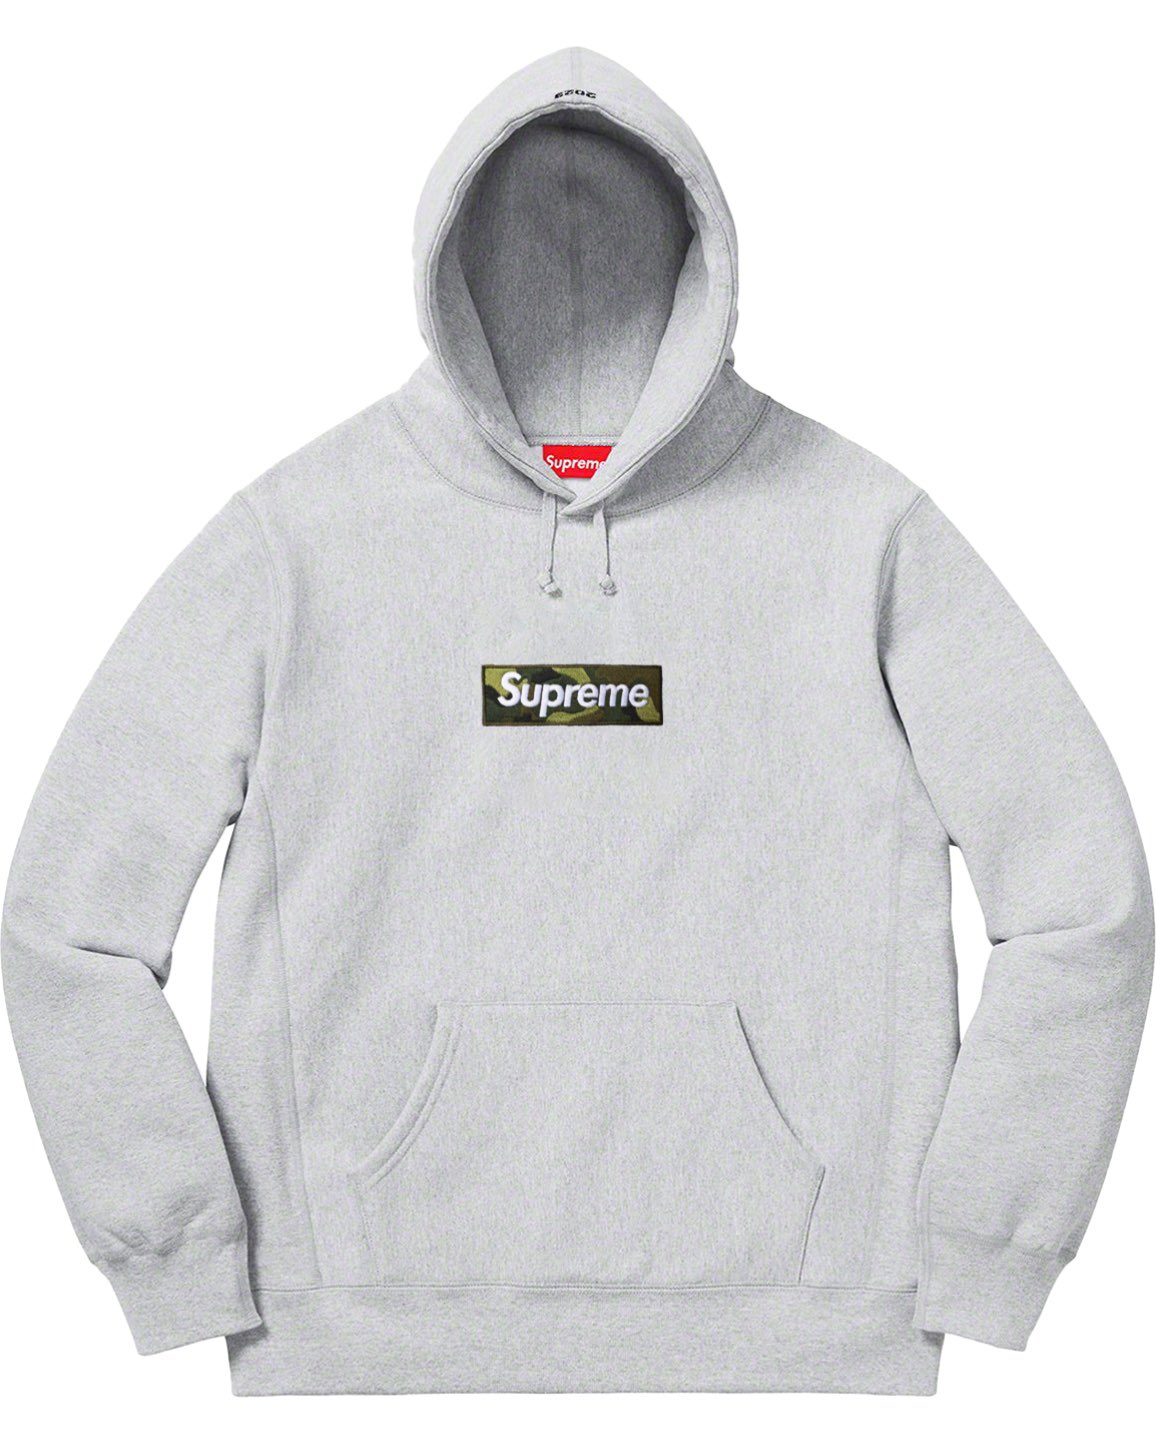 FIRST LOOK at Supreme FW23 - Camo Box Logo Hoodie 